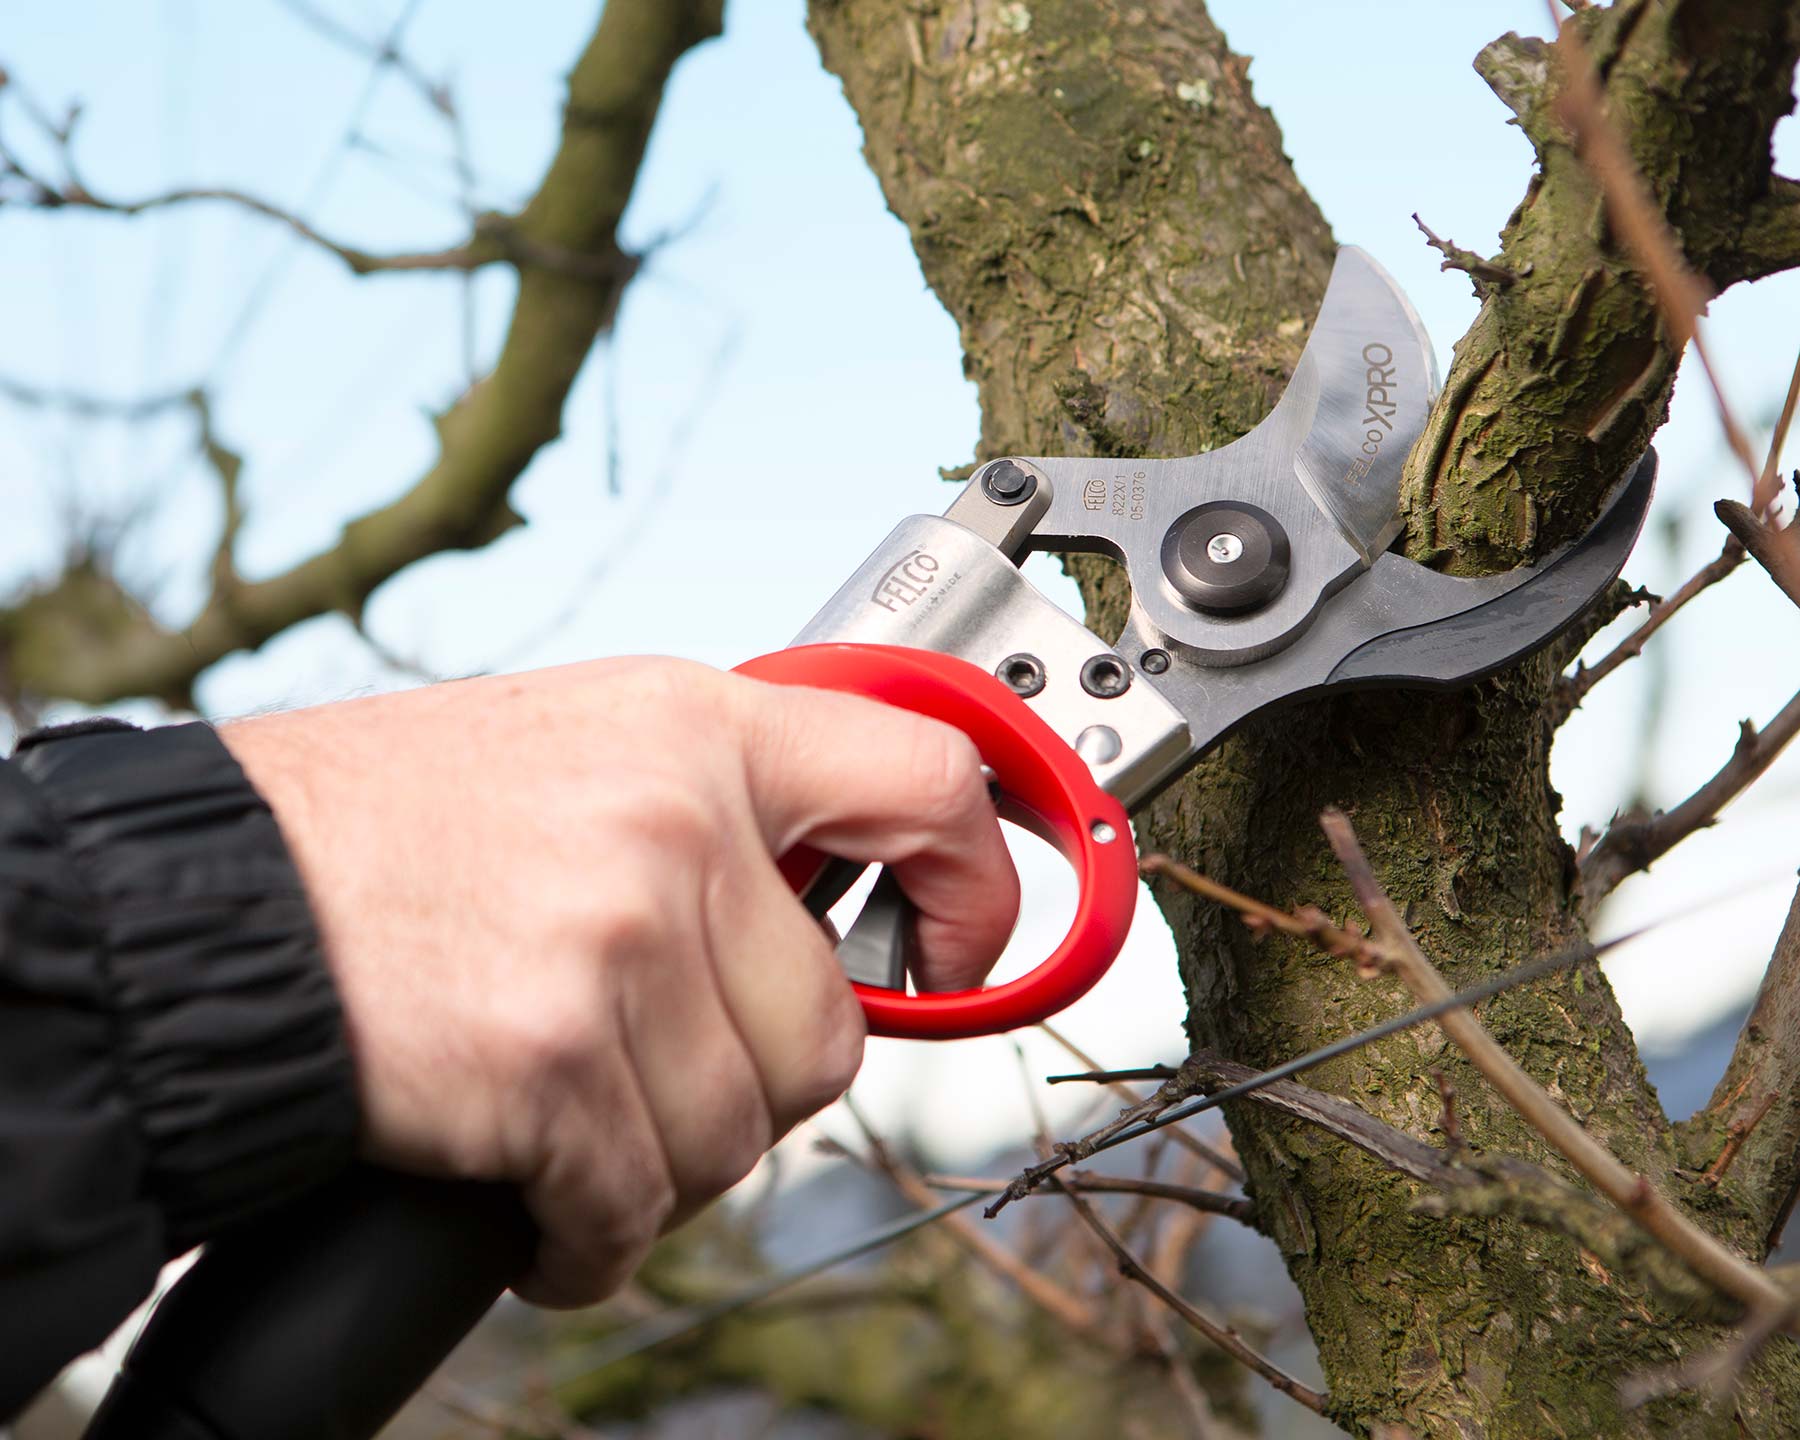 Felco 822 Powerblade will cut through branches up to 45mm in diameter